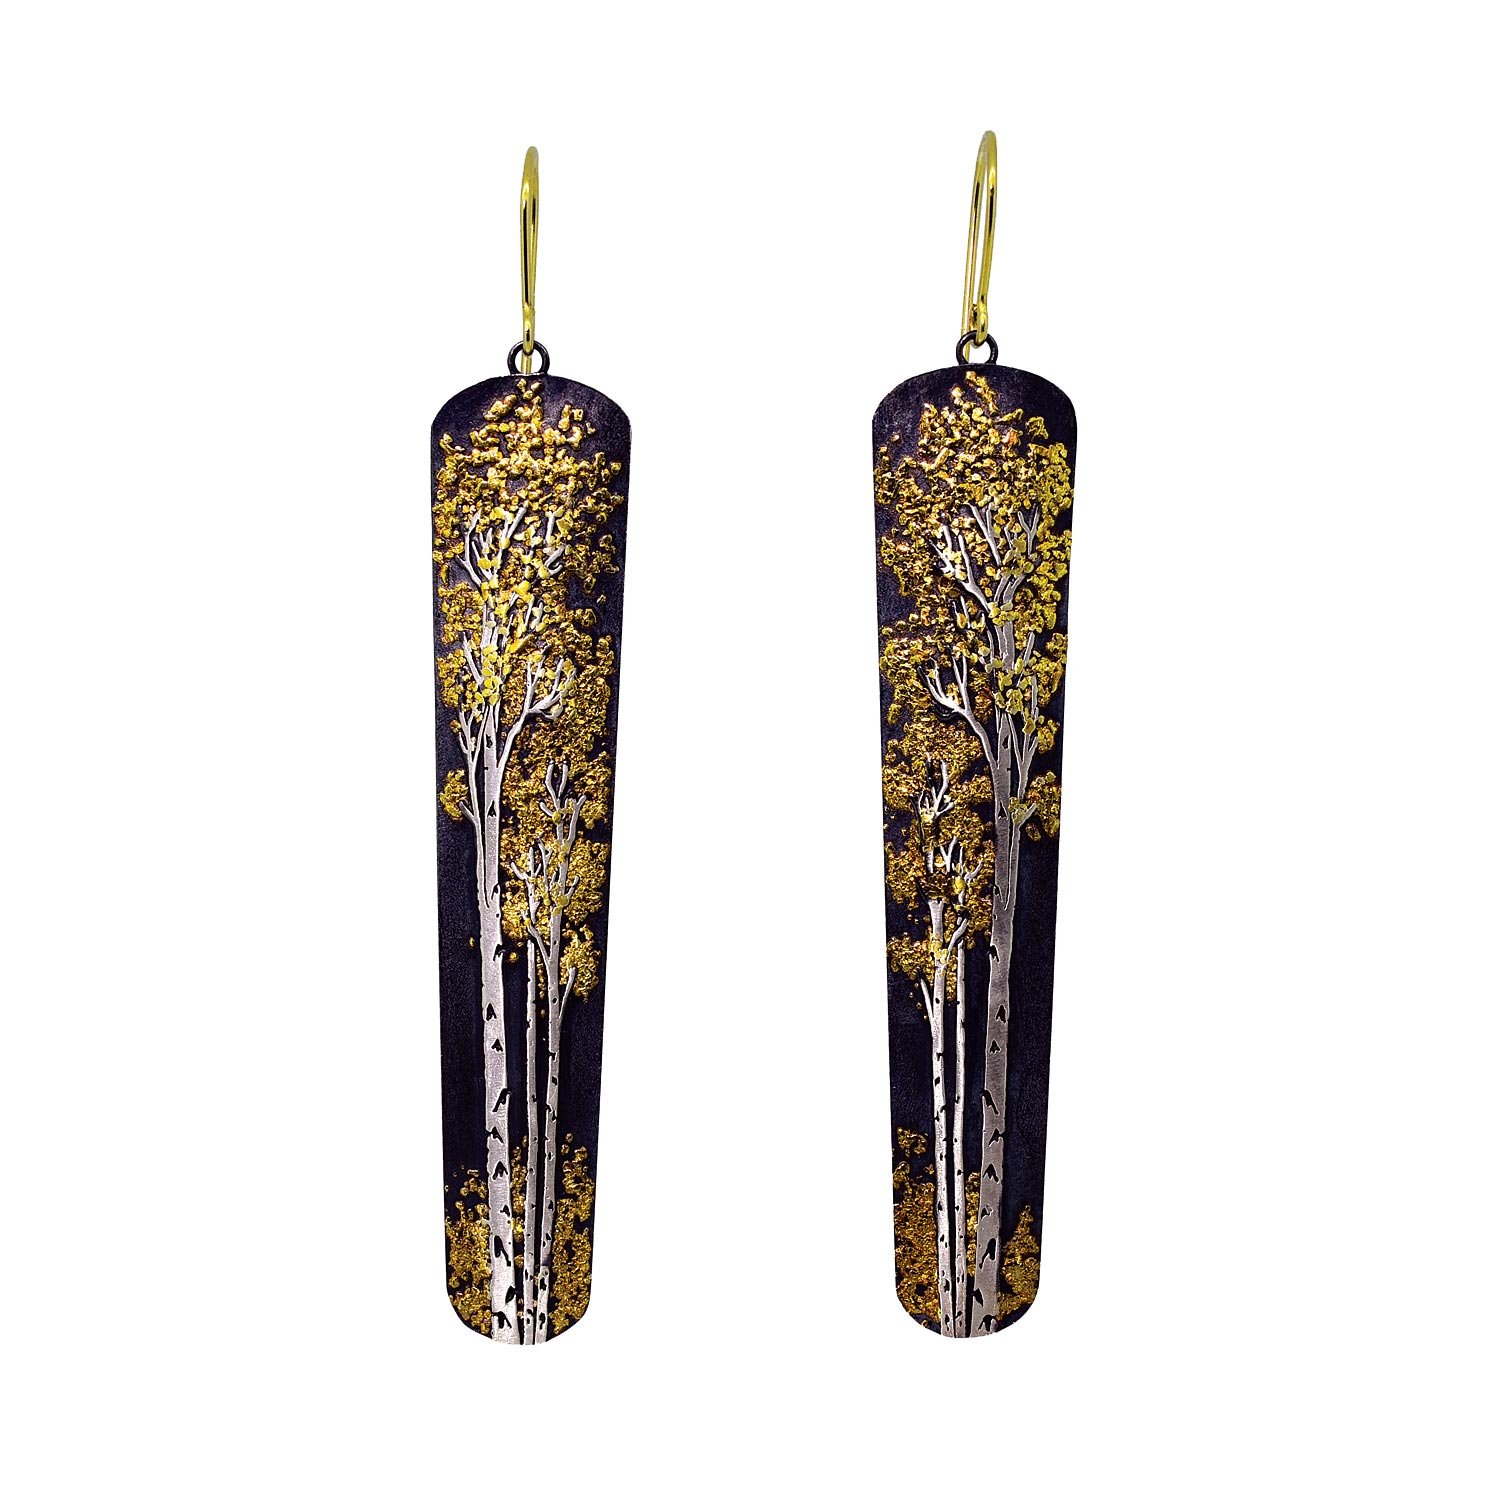  ASPEN EARRINGS of Argentium silver, twenty-two to twenty-three and a half karat placer gold fused to silver, fourteen karat gold hooks; carved, engraved, oxidized, 5.9 x 1.2 centimeters, 2023. 